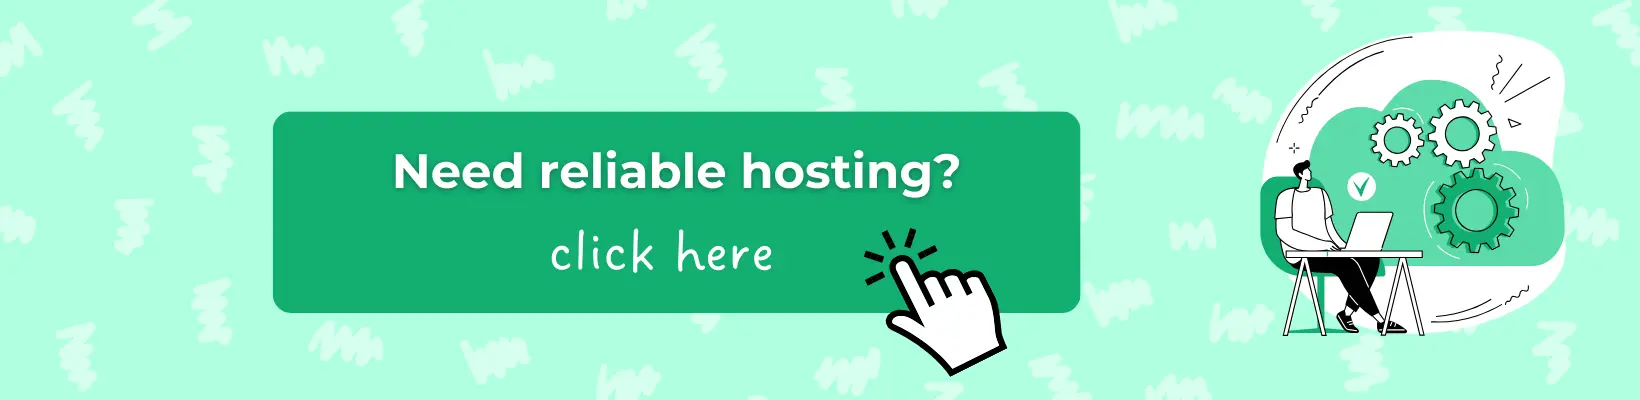 Buy reliable web hosting for the aggregator website